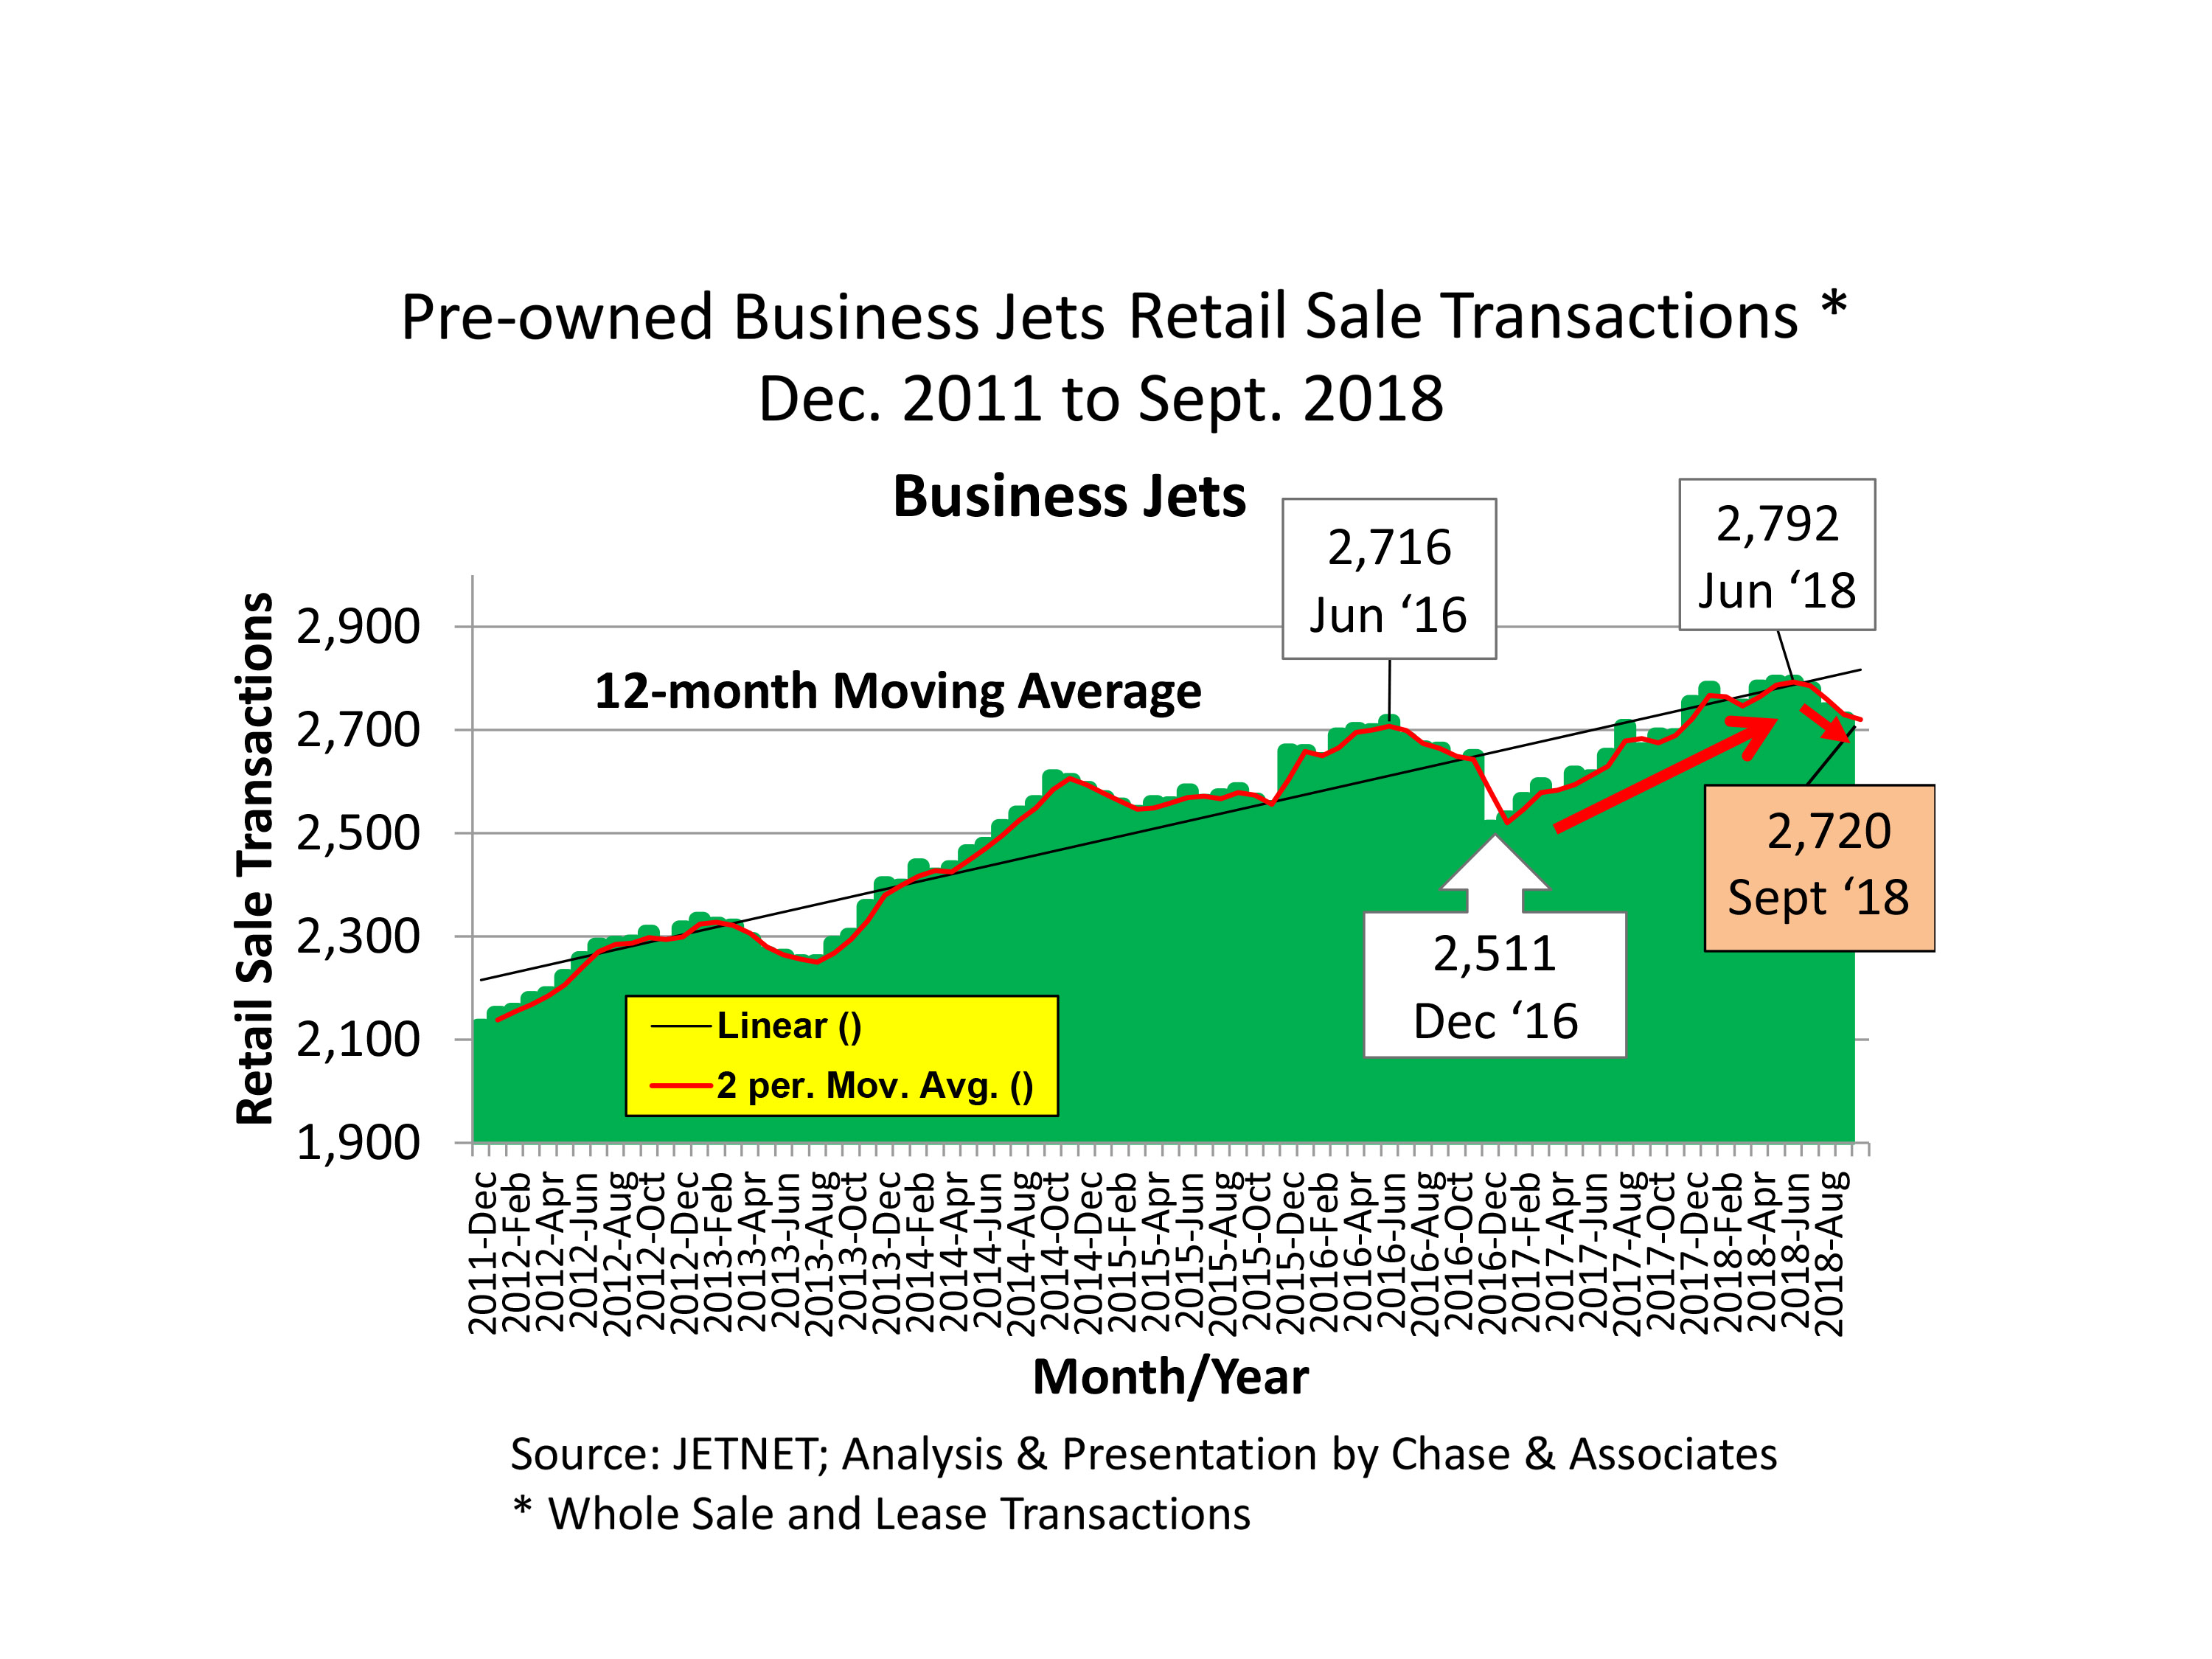 Chart A - Pre-Owned Business Jet Retail Sale Transacations, Dec. 2011-Sept. 2018